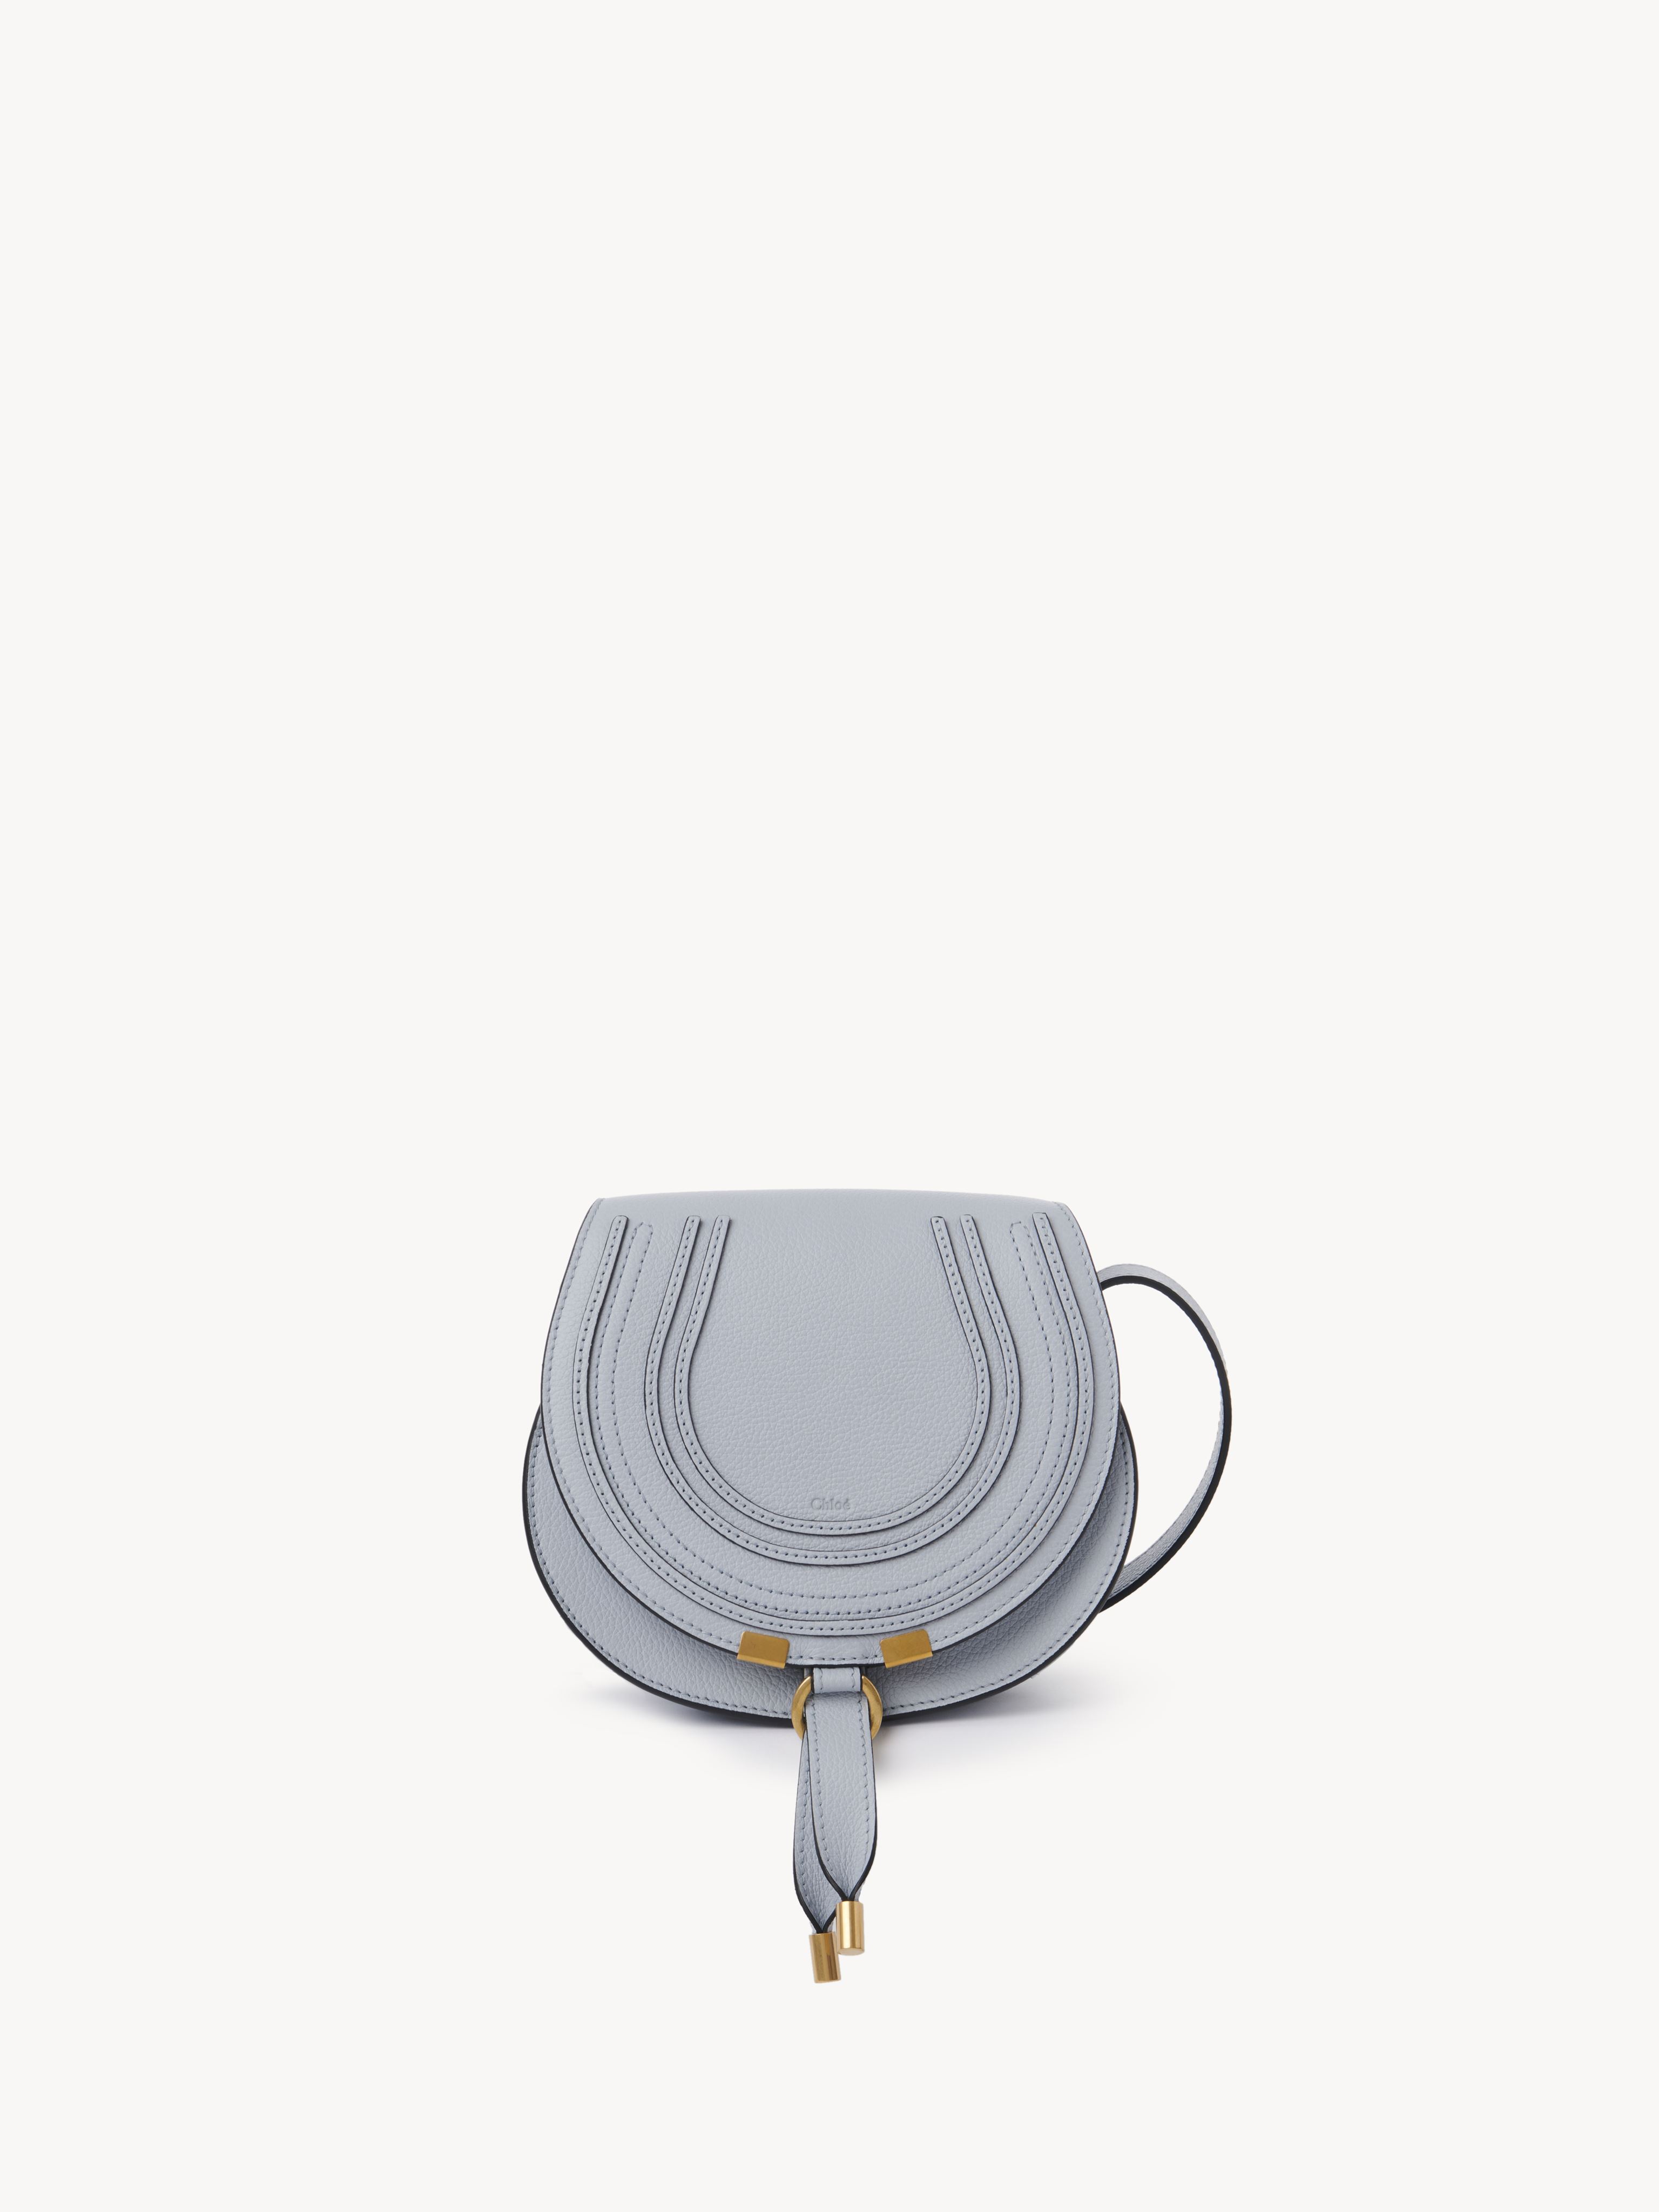 Chloé Small Marcie Saddle Bag In Grained Leather Blue Size Onesize 100% Calf-skin Leather